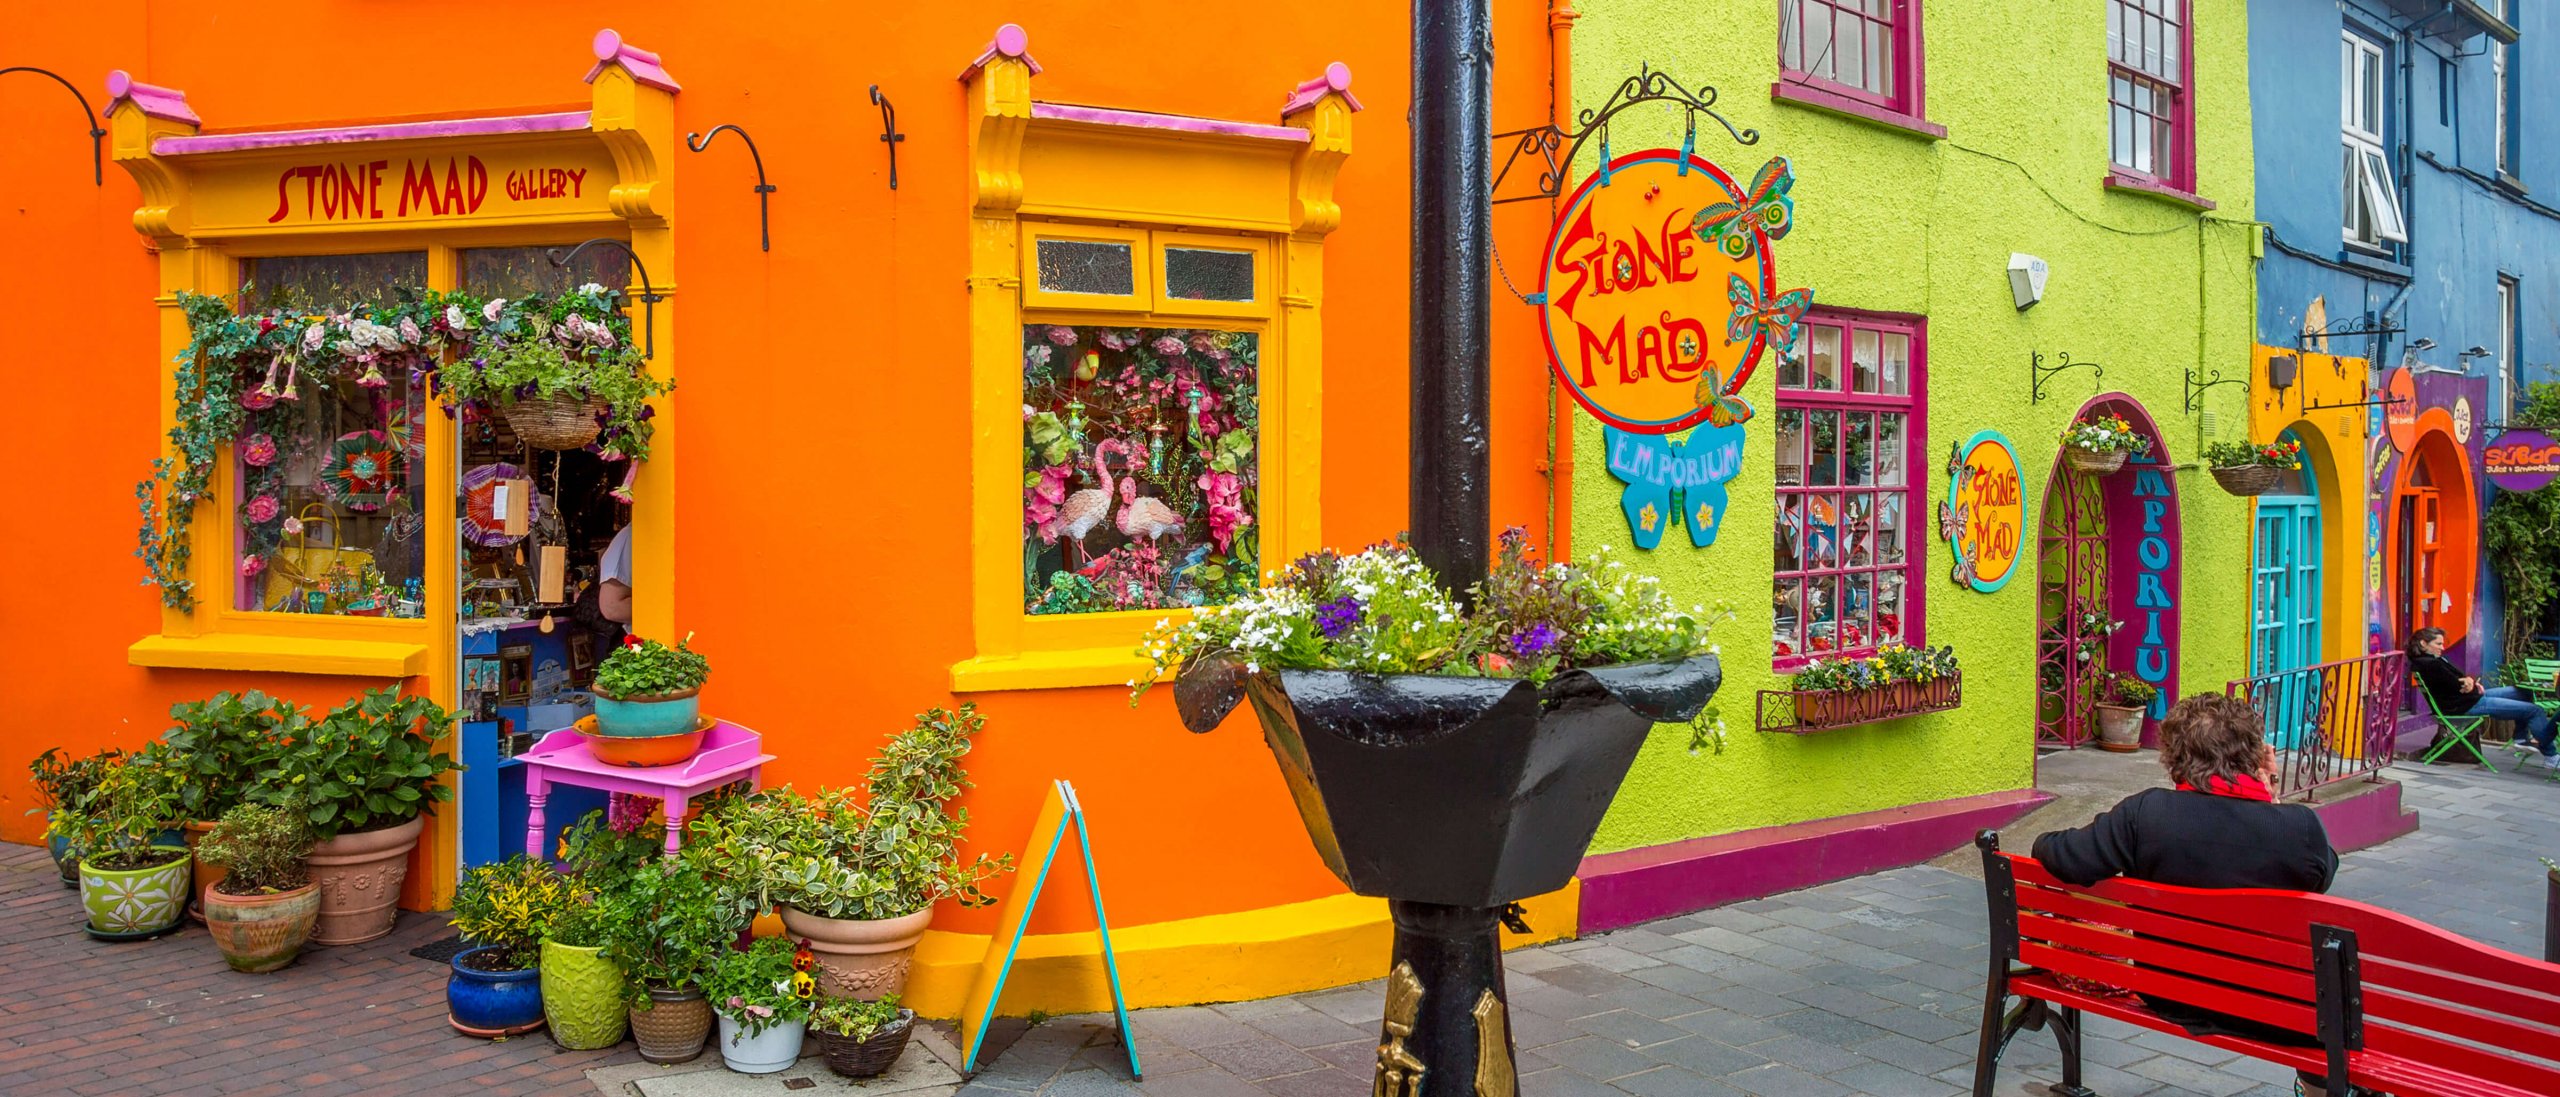 Colourful streetscape at Stone Mad Gallery in Kinsale